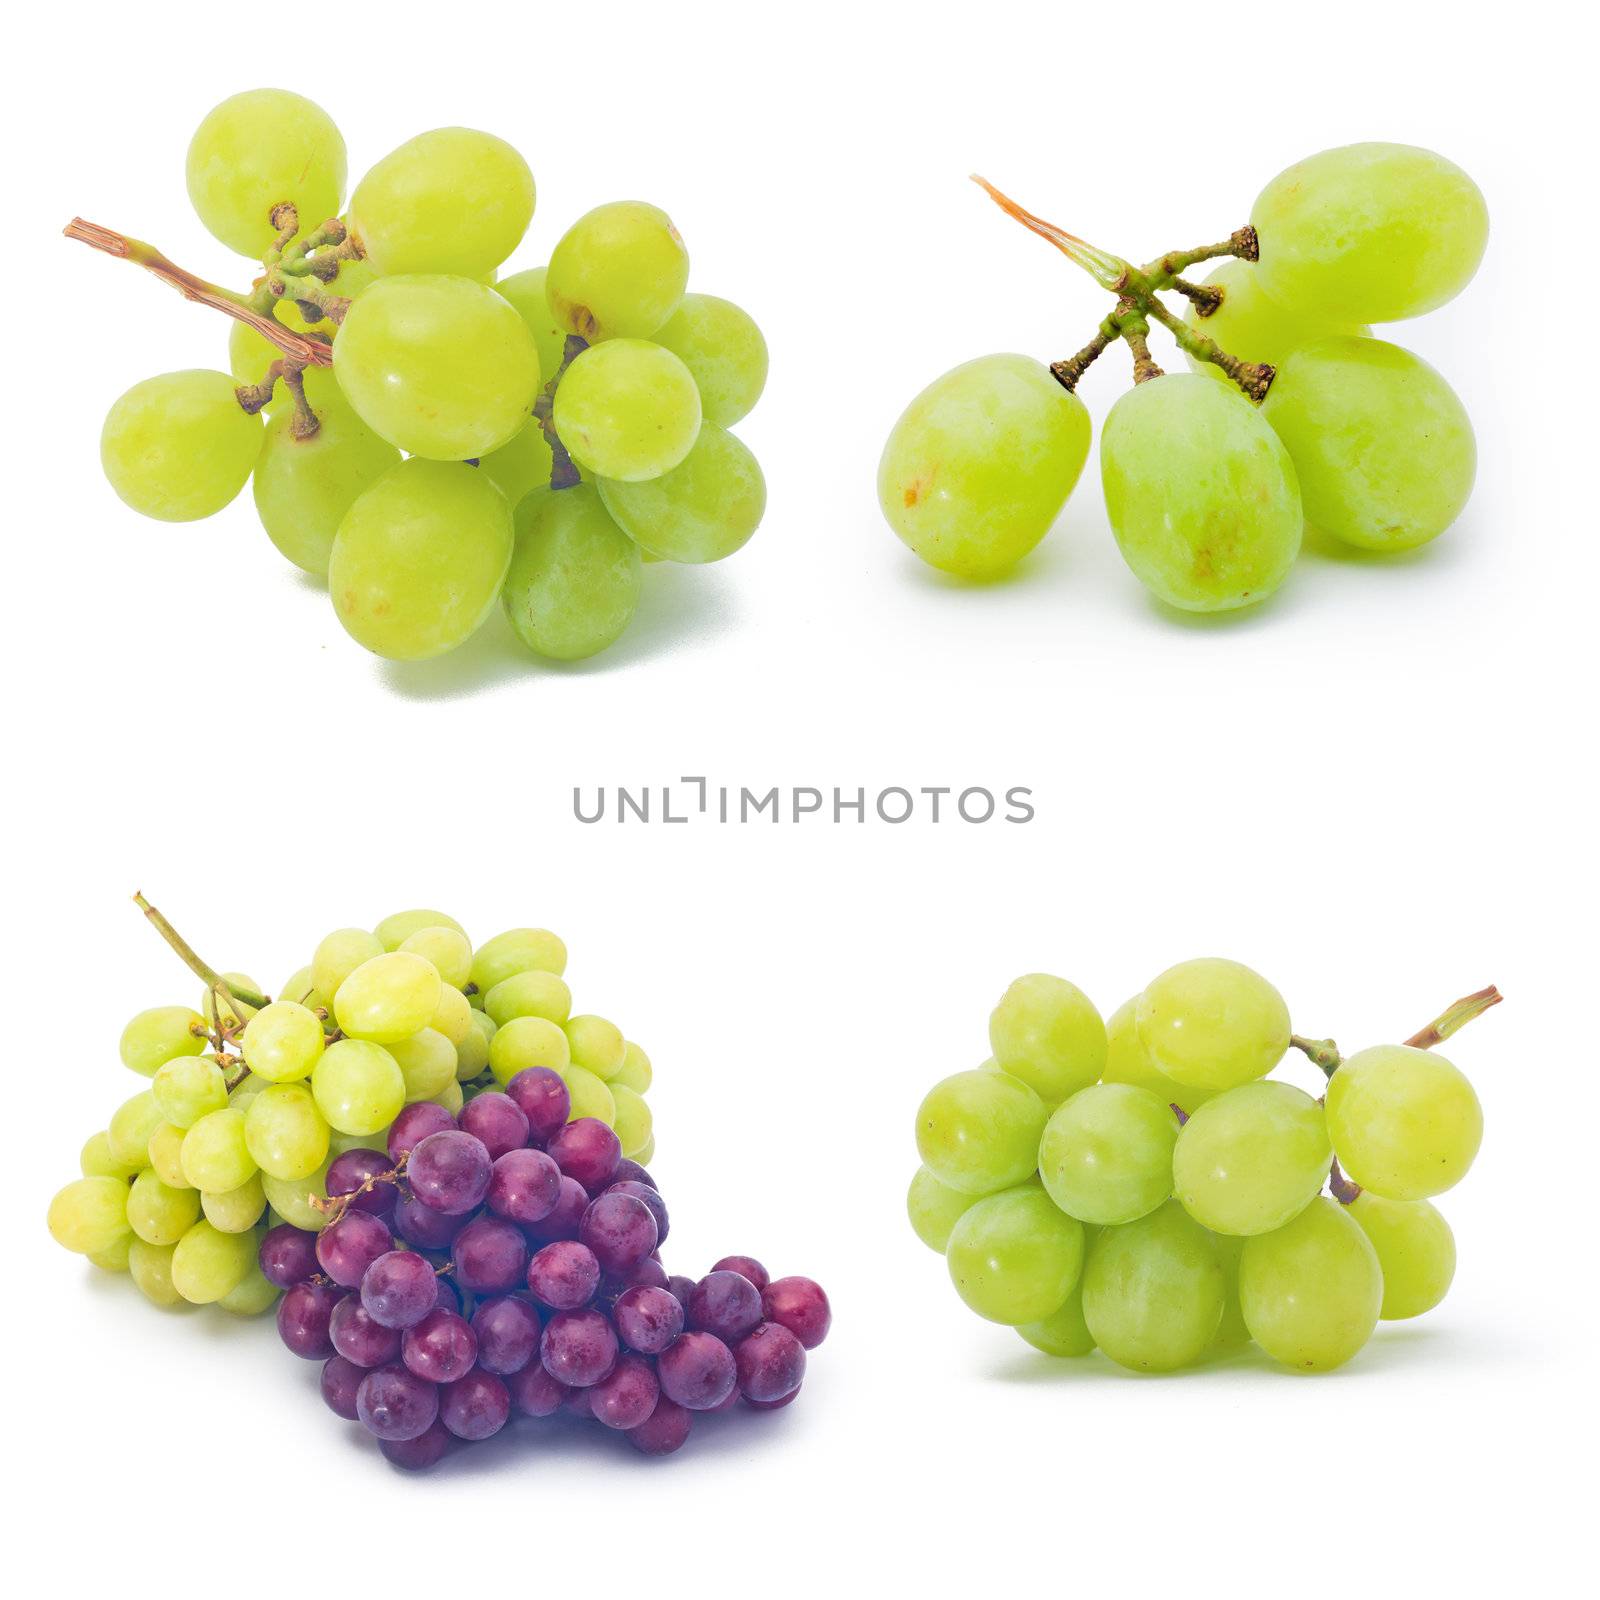 collection grapes. collection grapes on the white